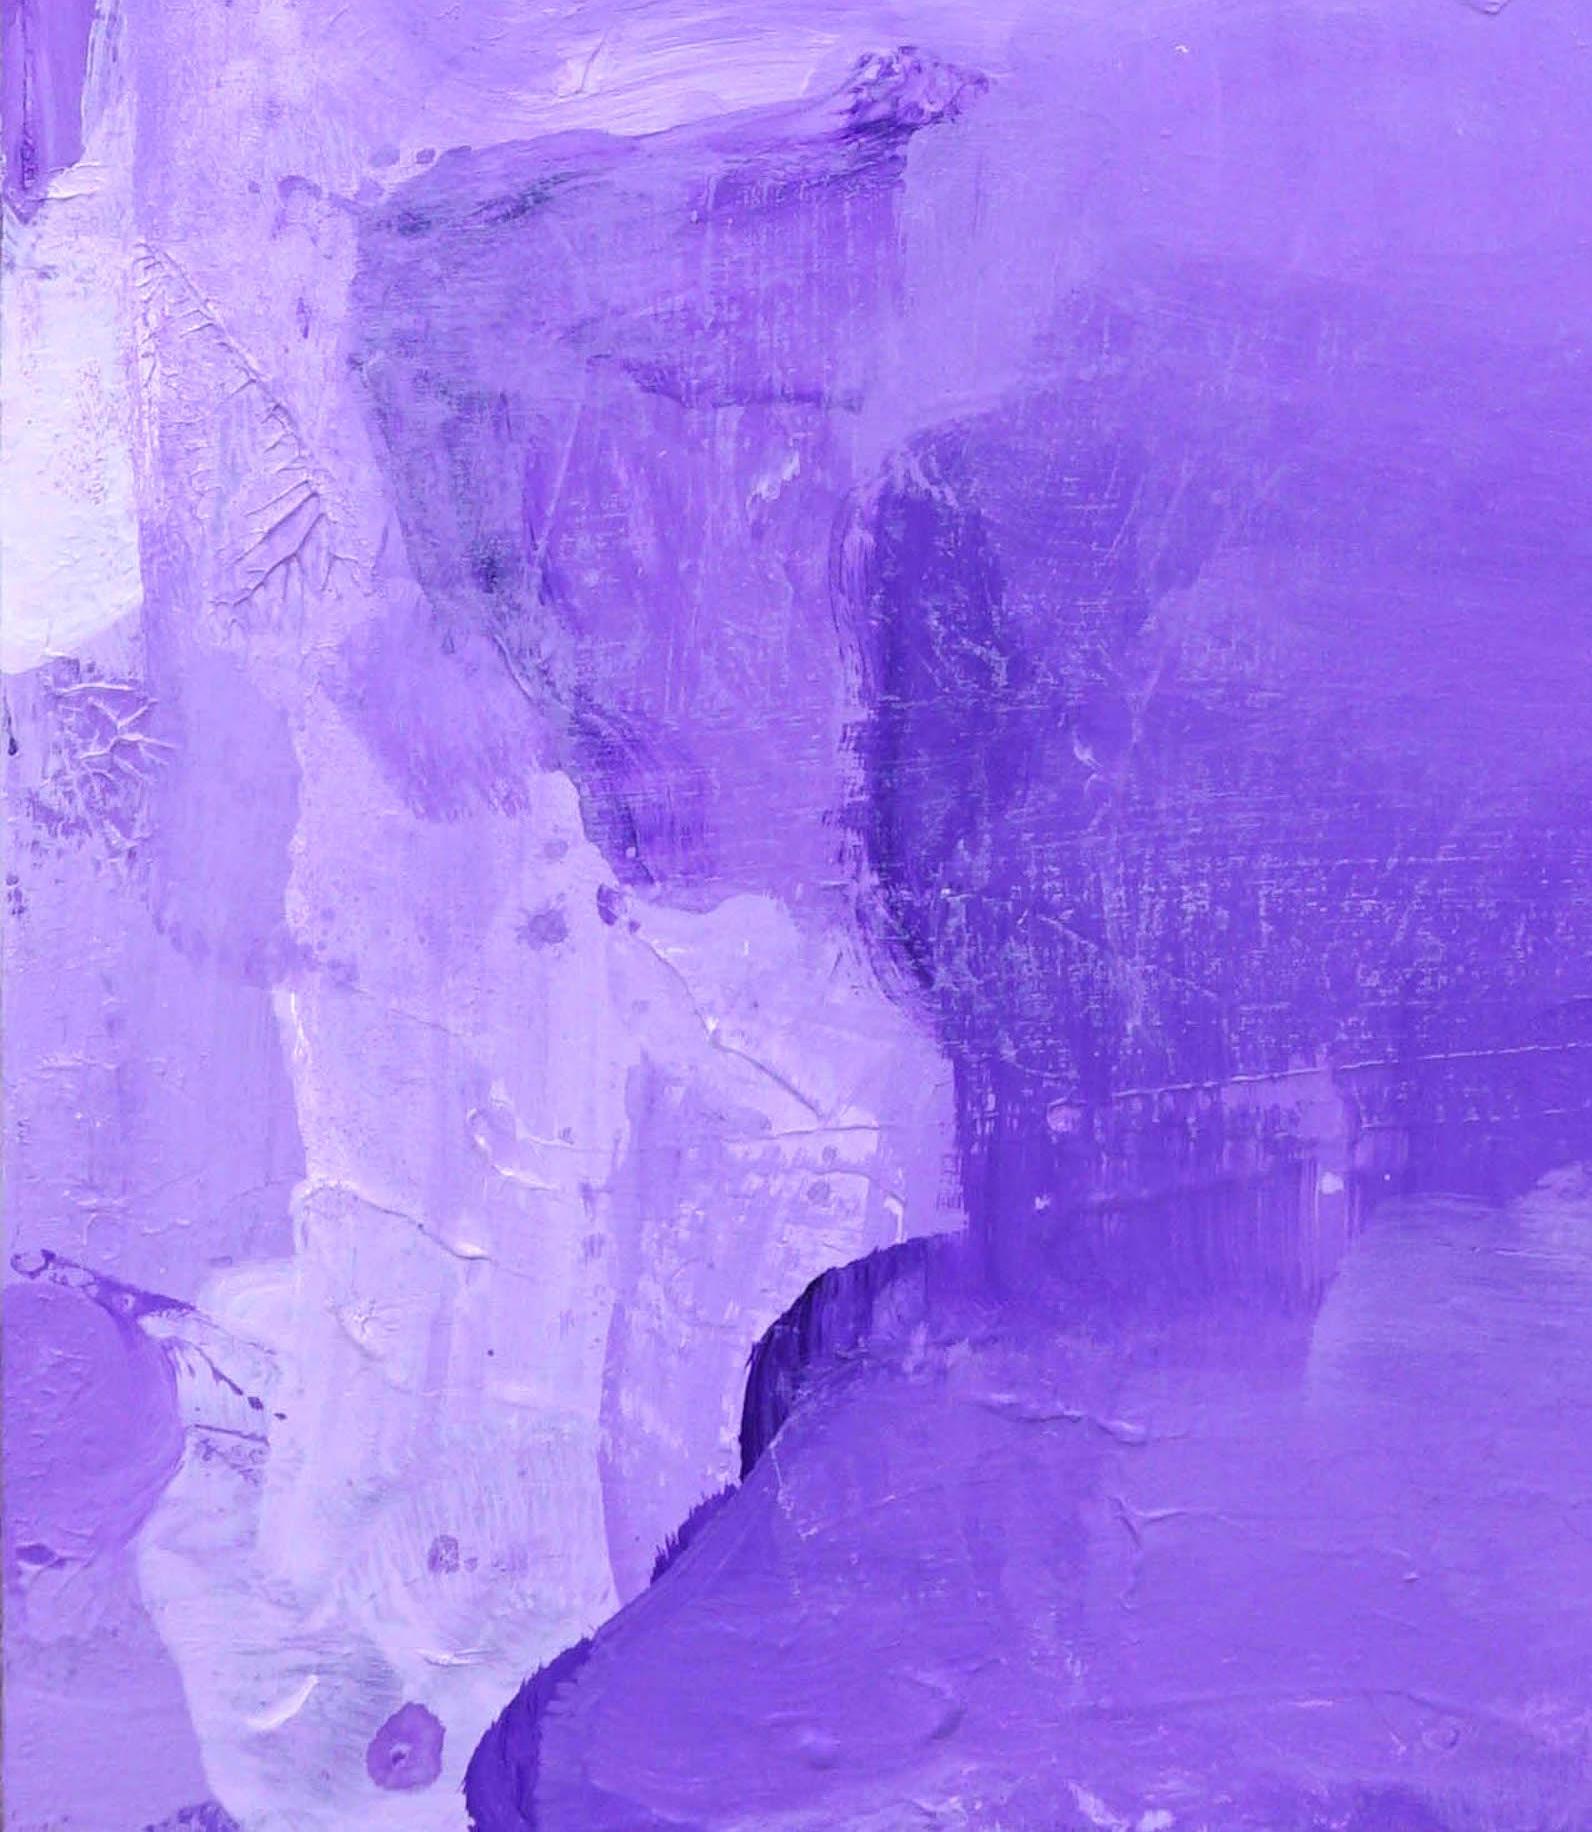 Lavender Sanguine, bright purple abstract expressionist painting on canvas - Painting by Lisa Fellerson